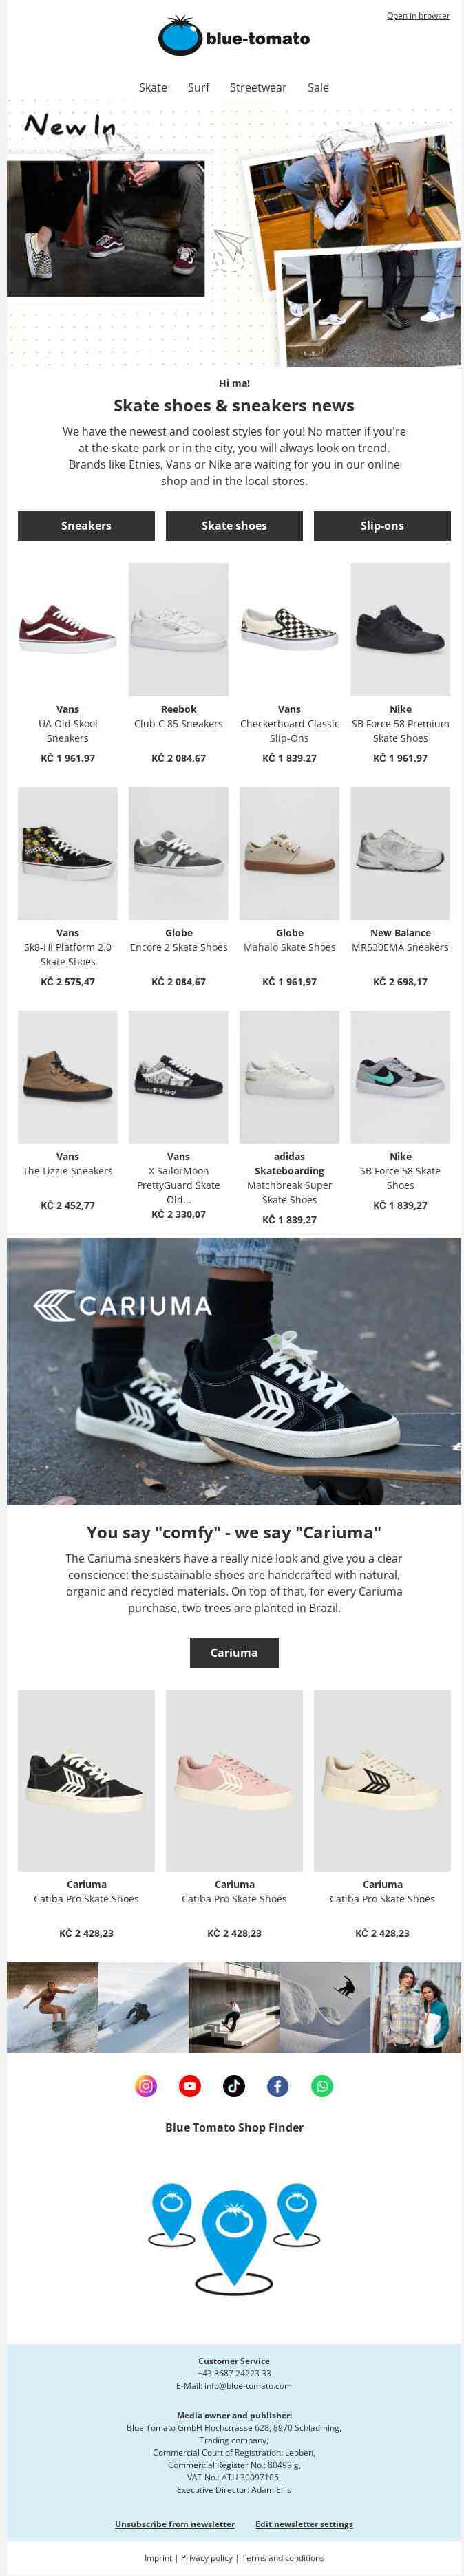 New shoes from top brands